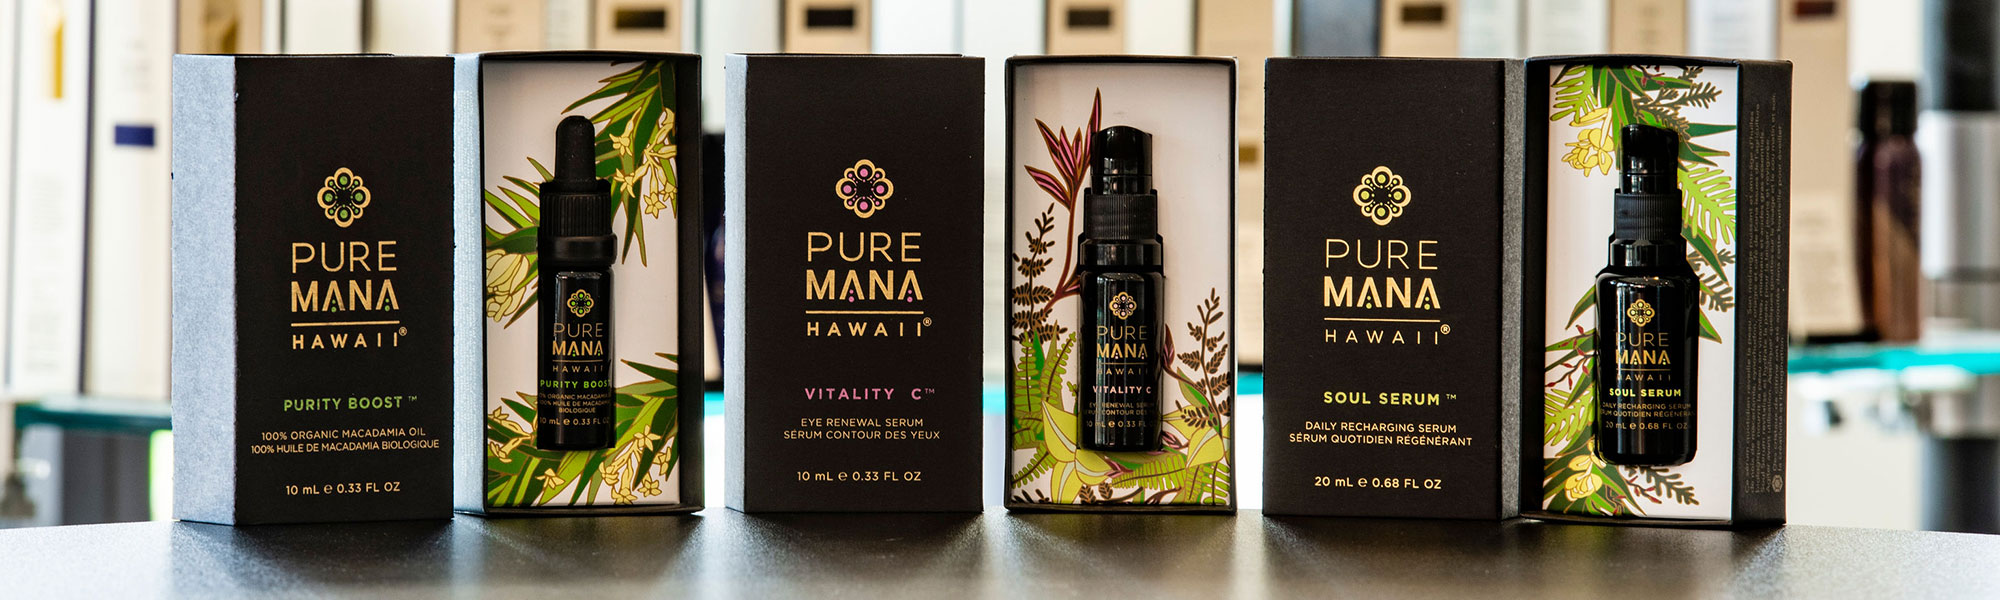 Pure Mana Products